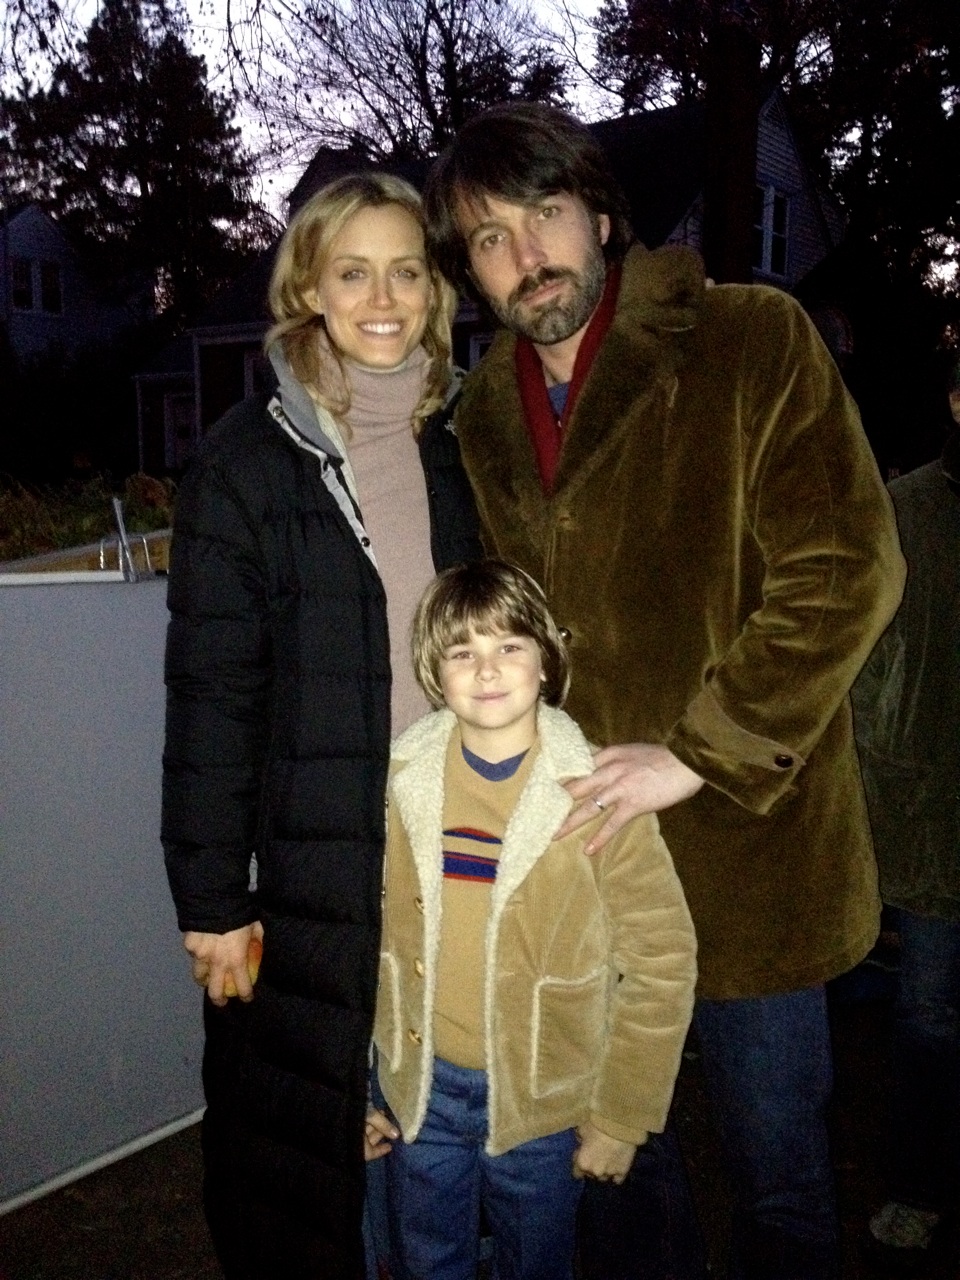 Aidan with Ben Affleck and Taylor Schilling on the set of ARGO.